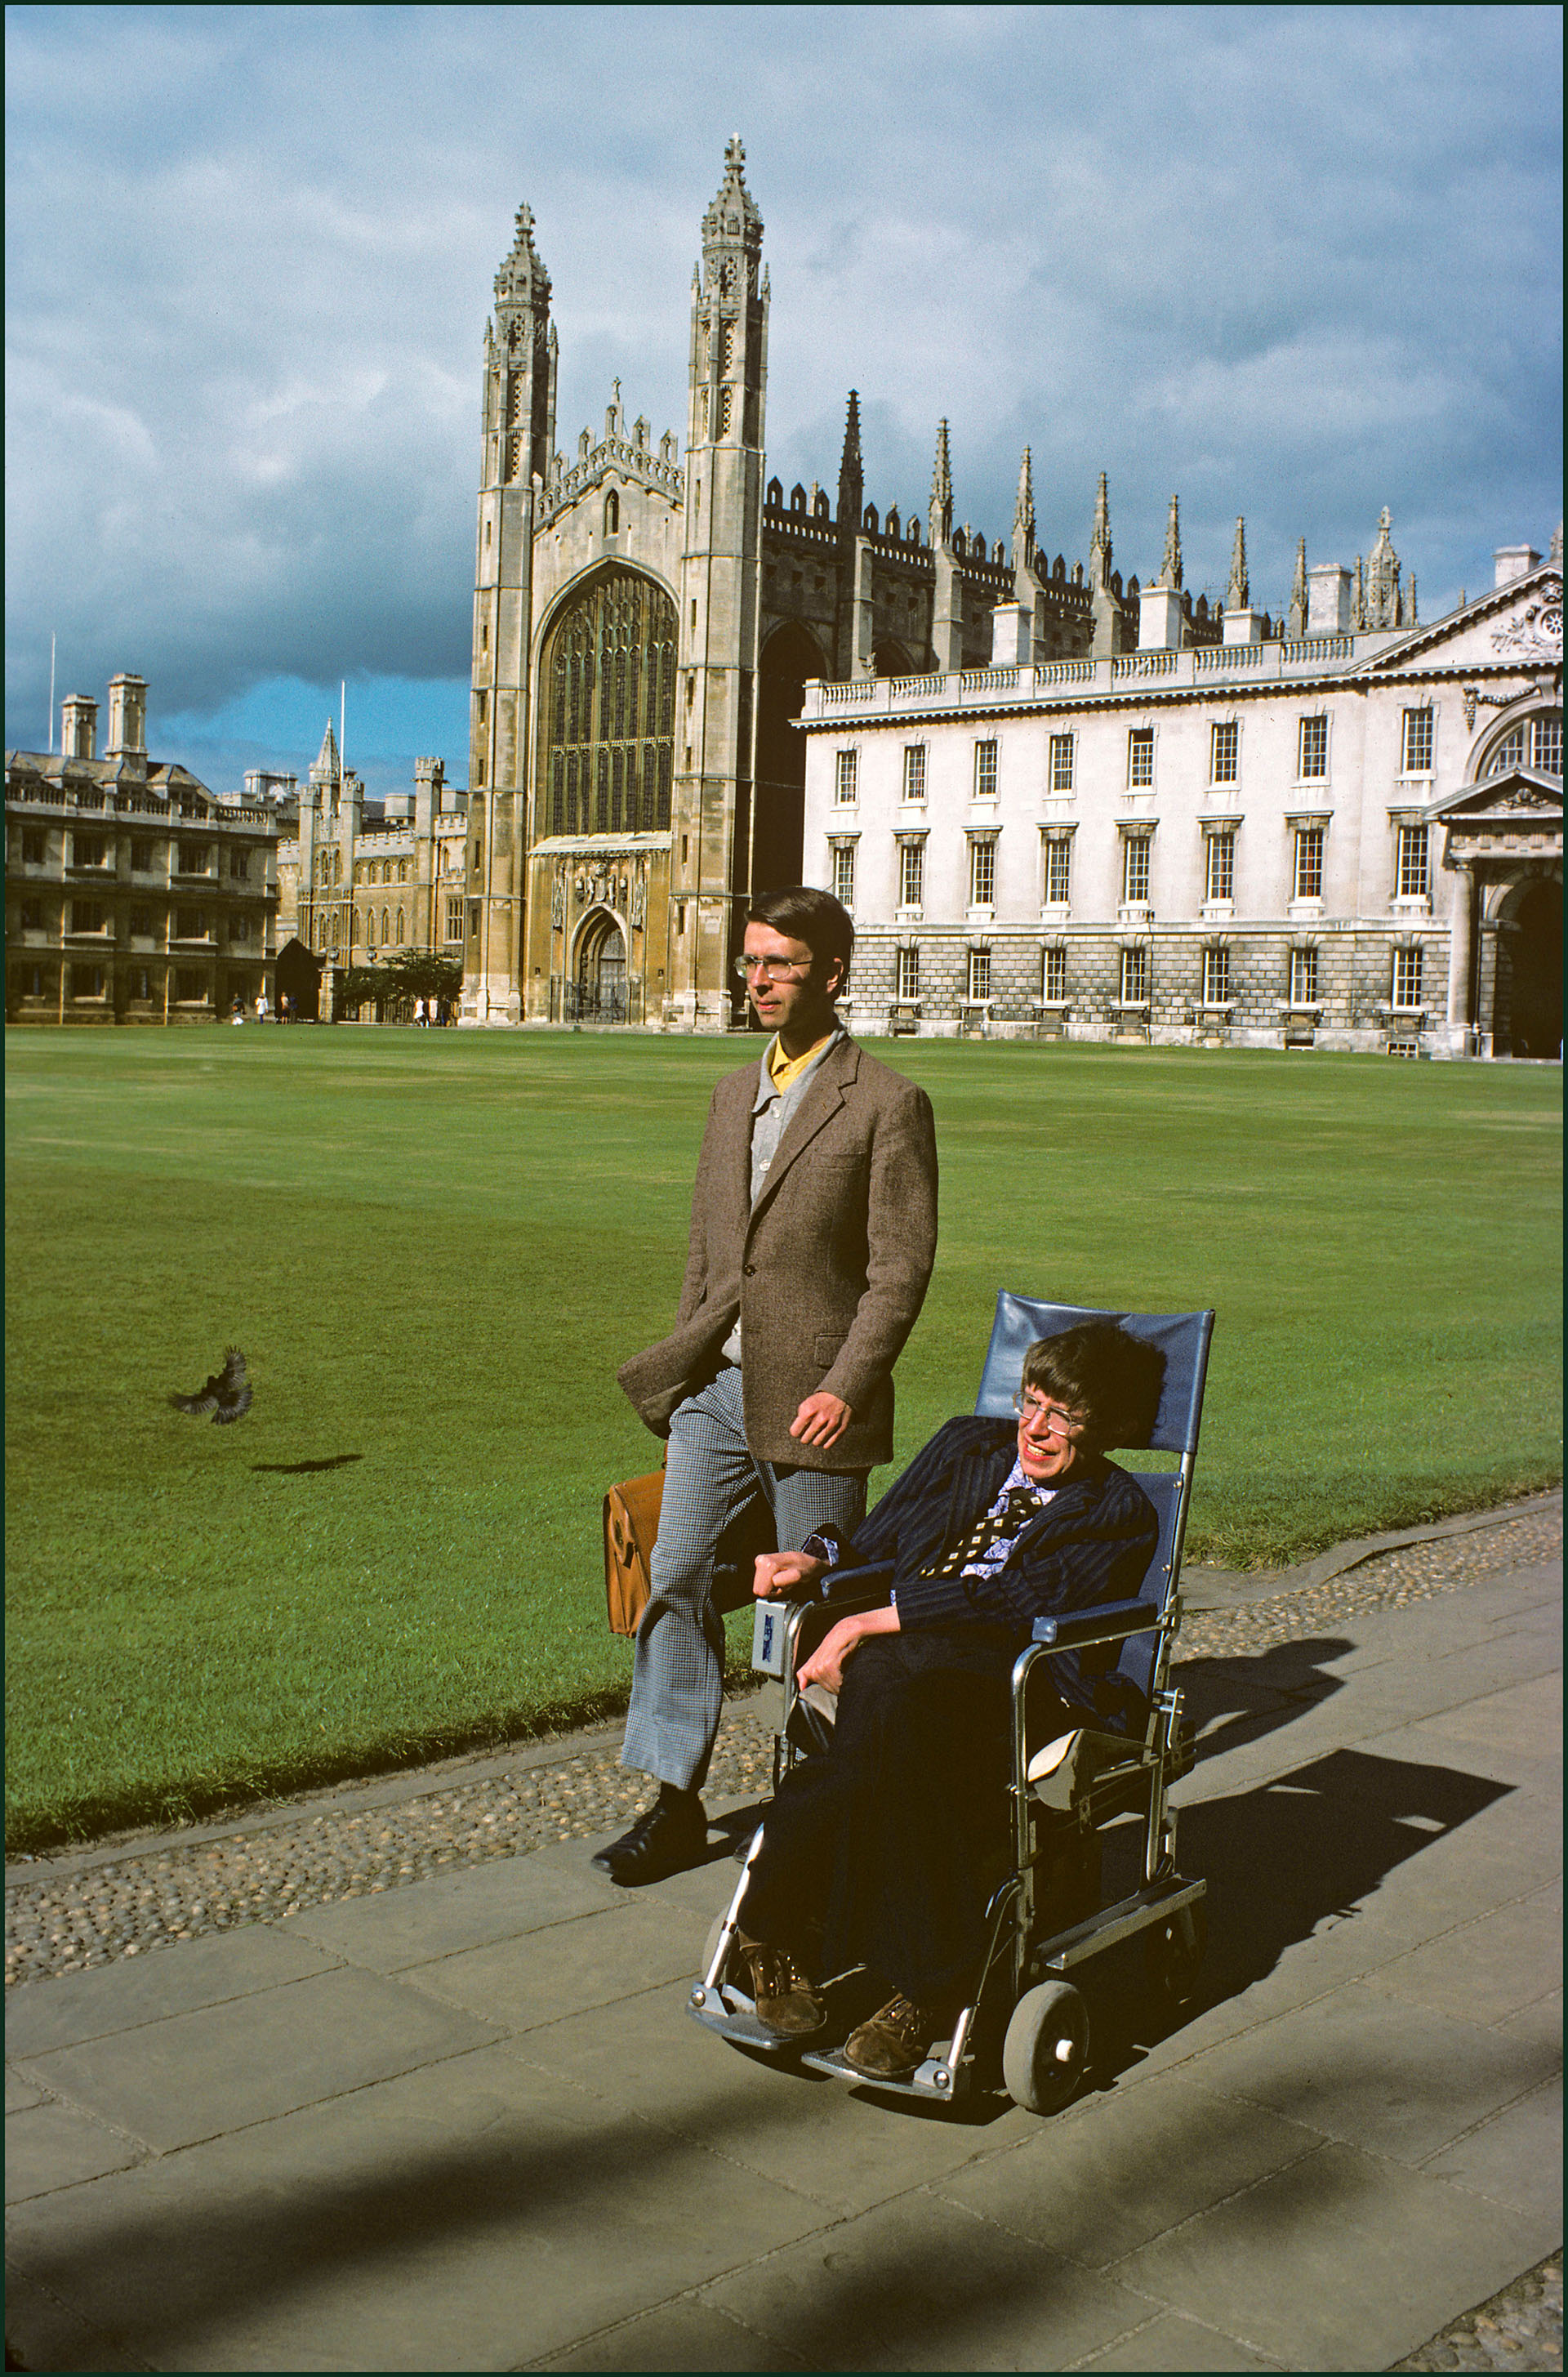 Hawking in chair with colleague alongside and majestic collegiate building in background